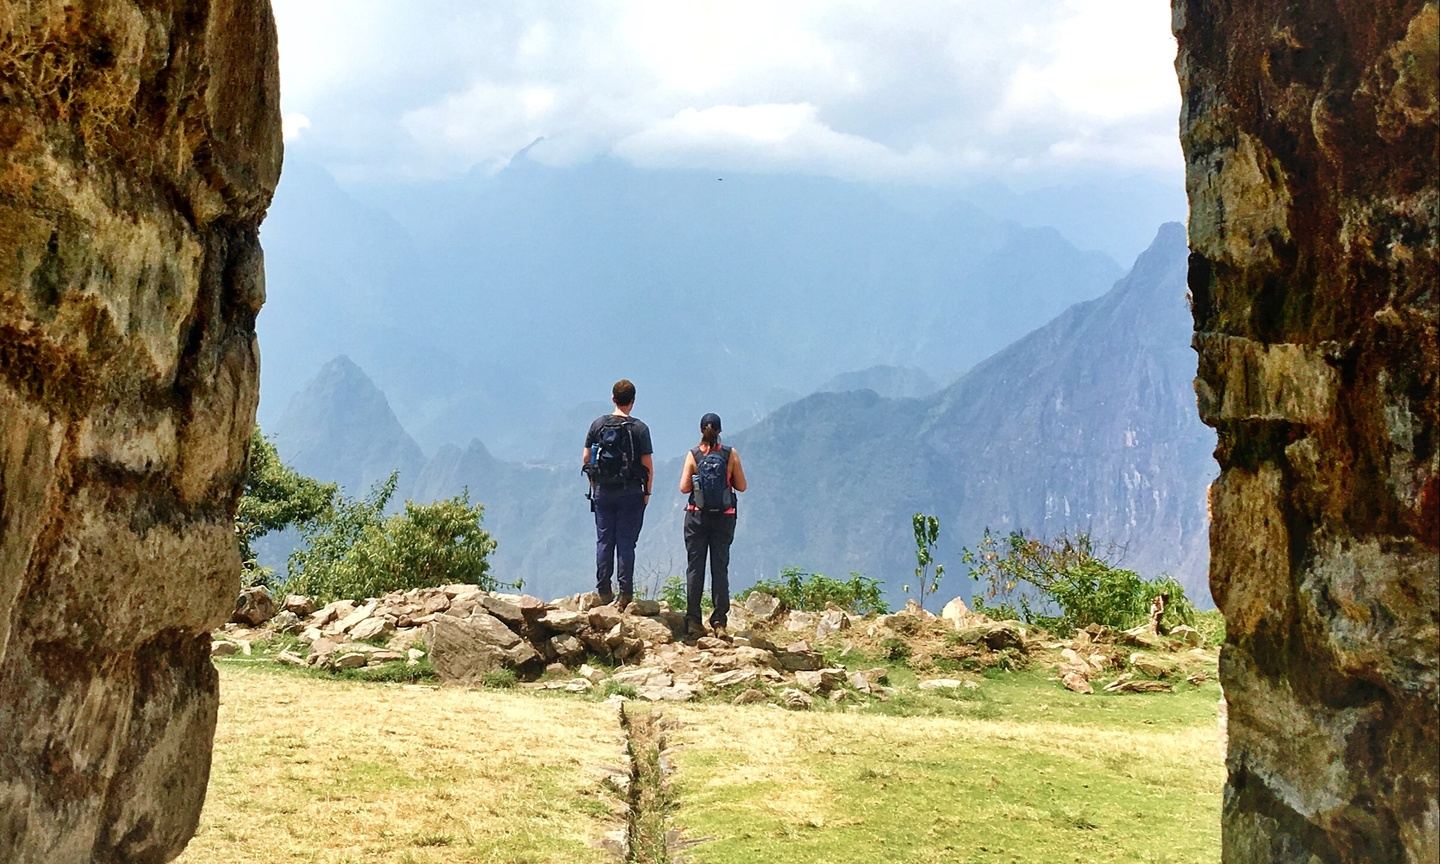 Epic Machu Picchu trip with mountain lodges included